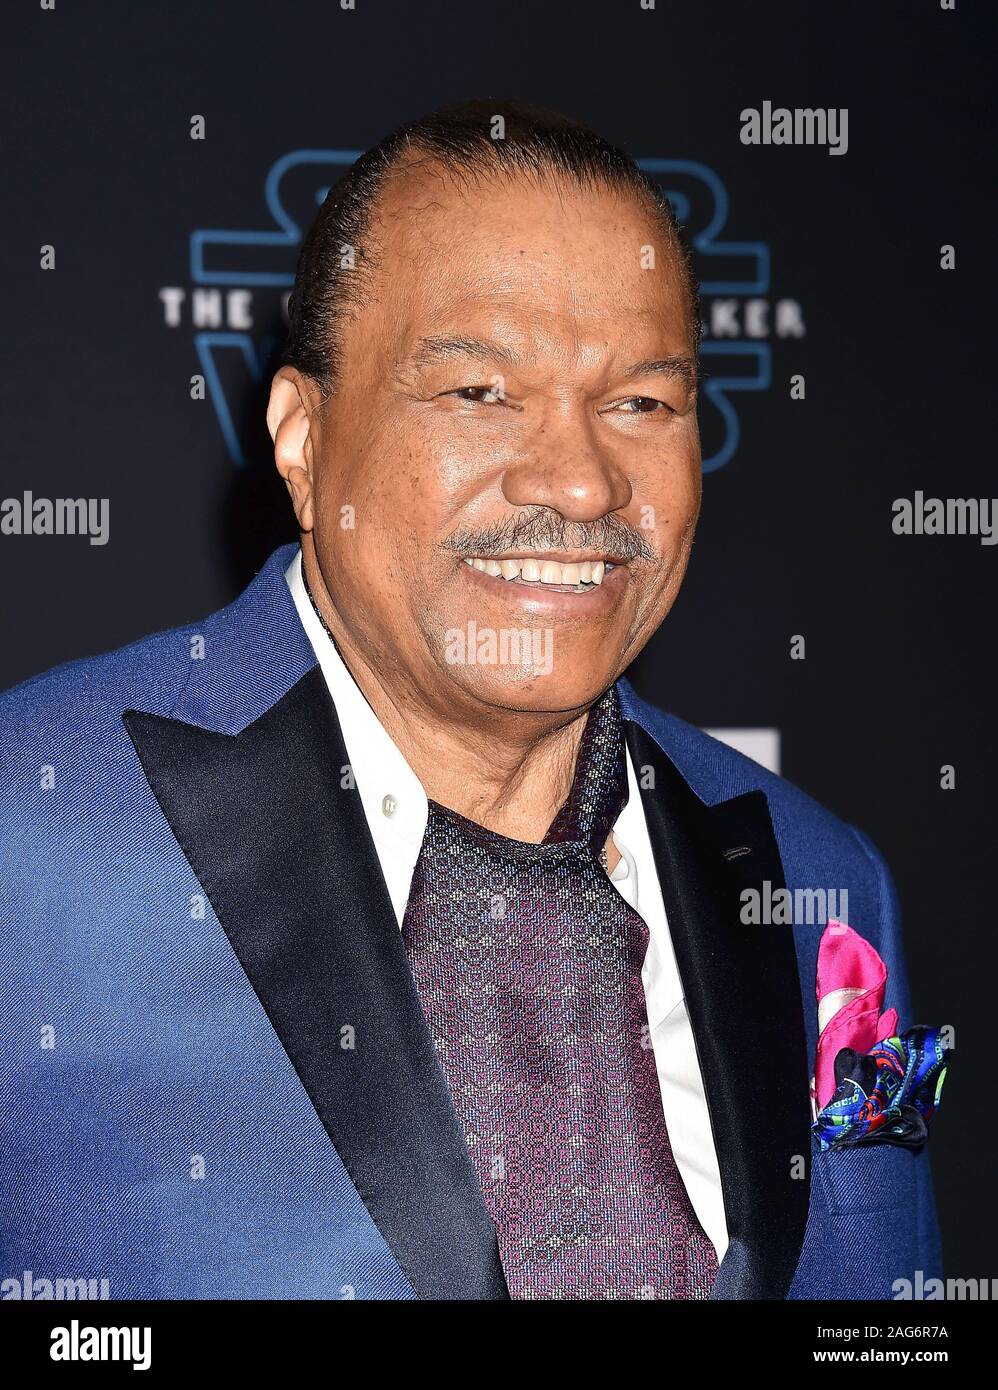 HOLLYWOOD, CA - DECEMBER 16: Billy Dee Williams attends the Premiere of Disney's 'Star Wars: The Rise Of Skywalker' at the El Capitan Theatre on December 16, 2019 in Hollywood, California. Stock Photo